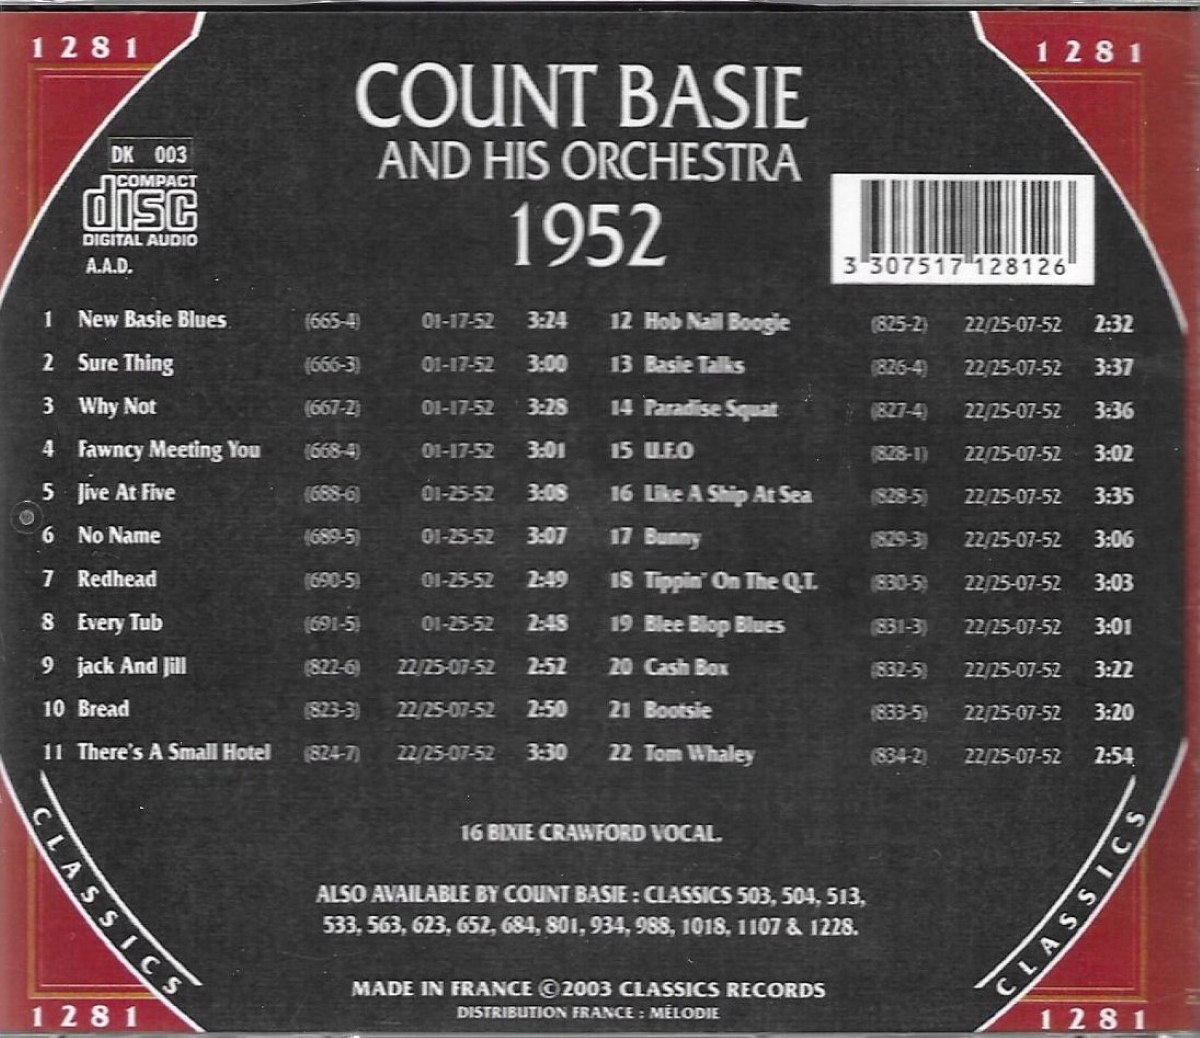 The Chronological Count Basie And His Orchestra: 1952